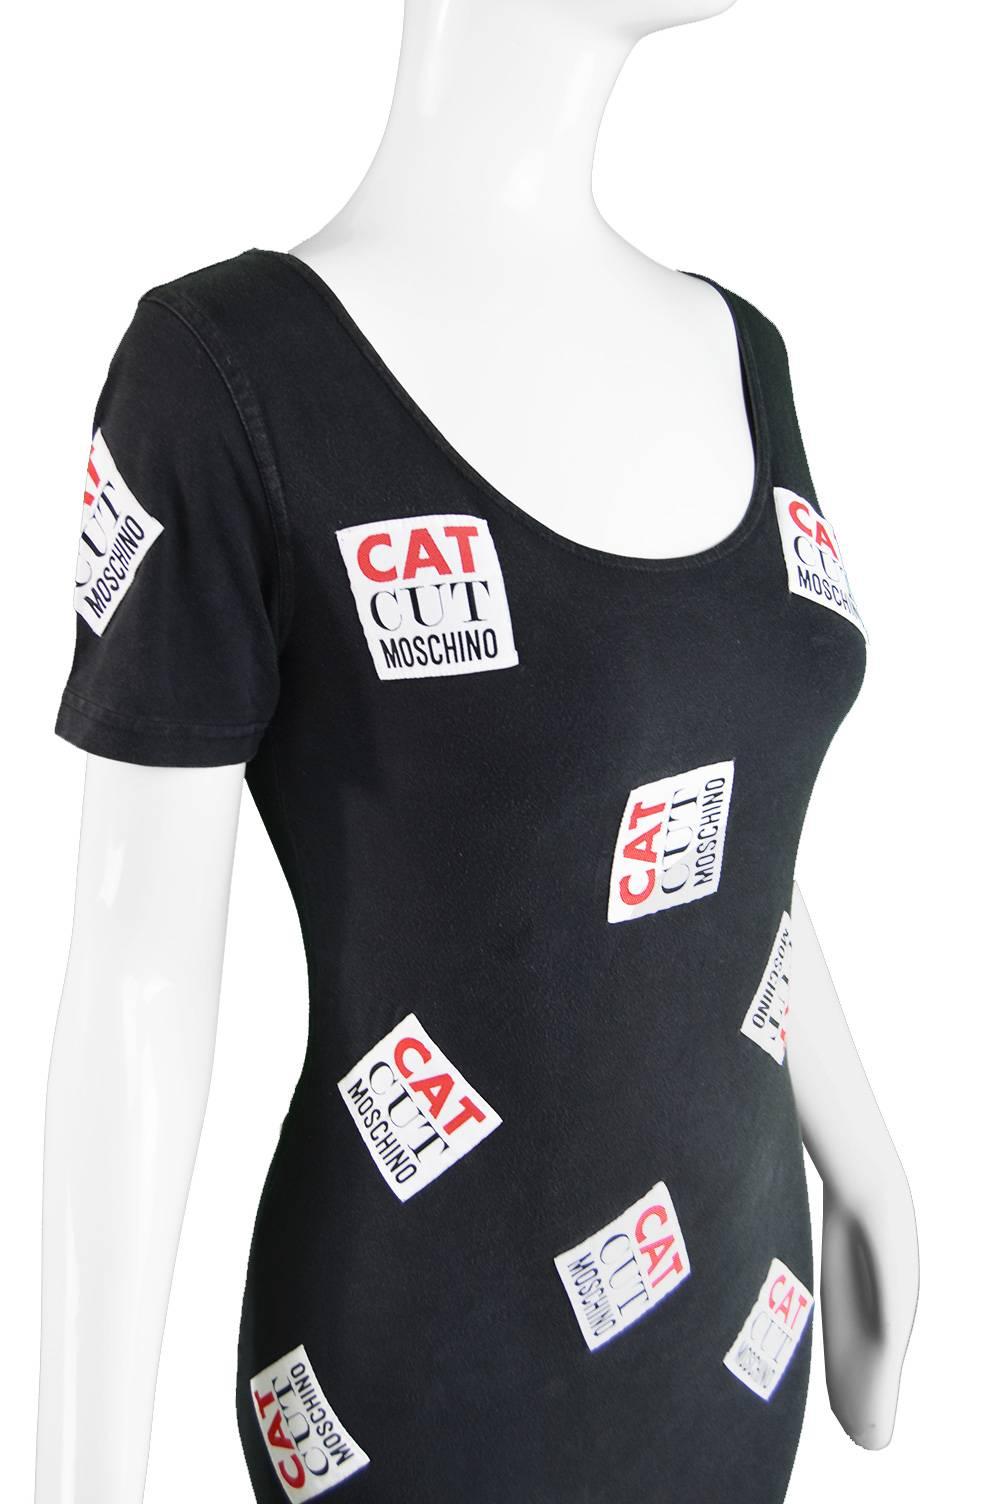 Moschino Vintage 'Cat Cut Moschino' Patch Bodycon Dress, 1990s  In Excellent Condition For Sale In Doncaster, South Yorkshire